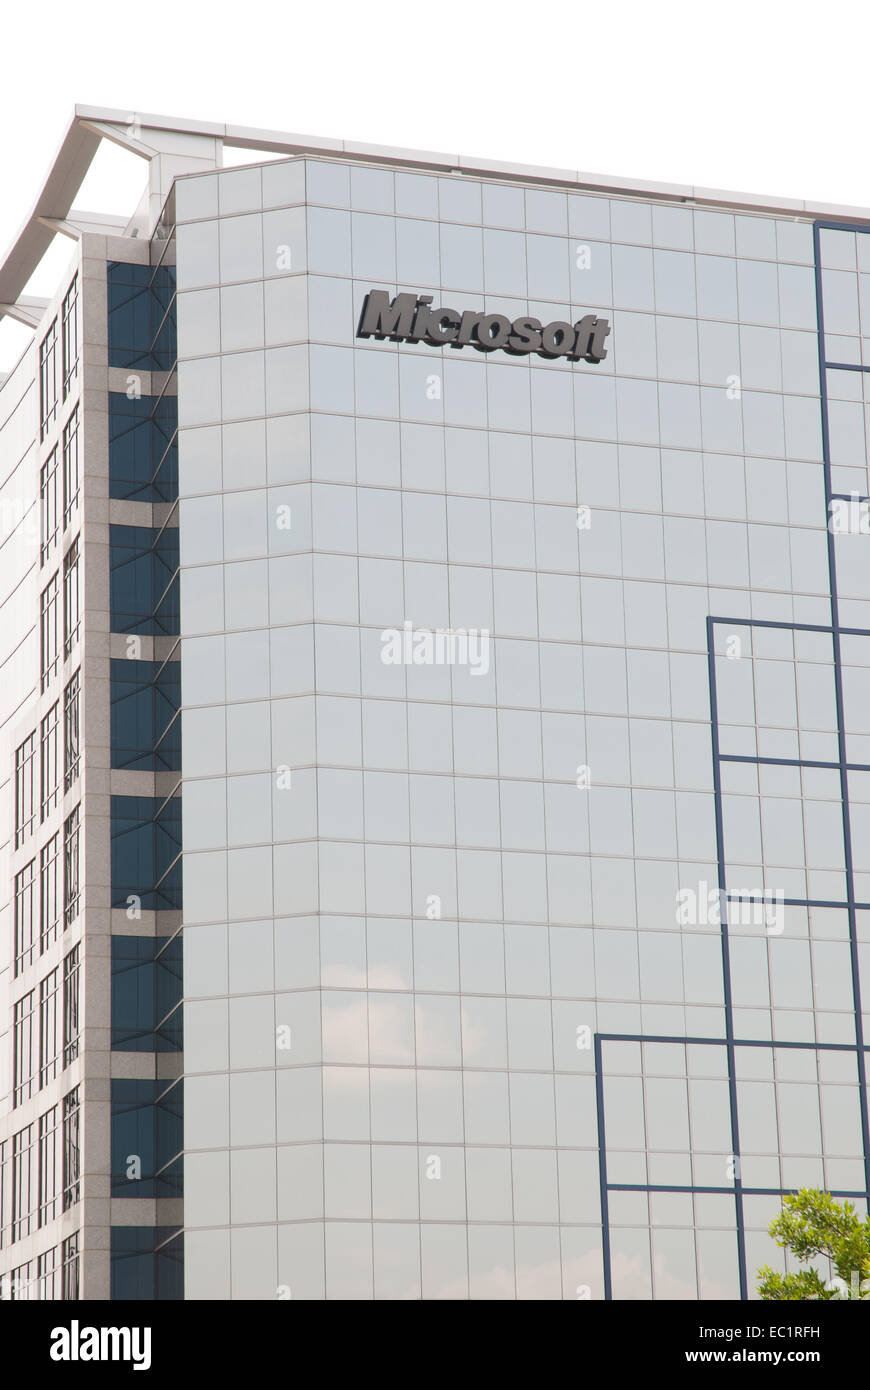 Microsoft Building Exterieur, in St. Louis, MO.  Microsoft North Central District: St. Louis, MO Stockfoto